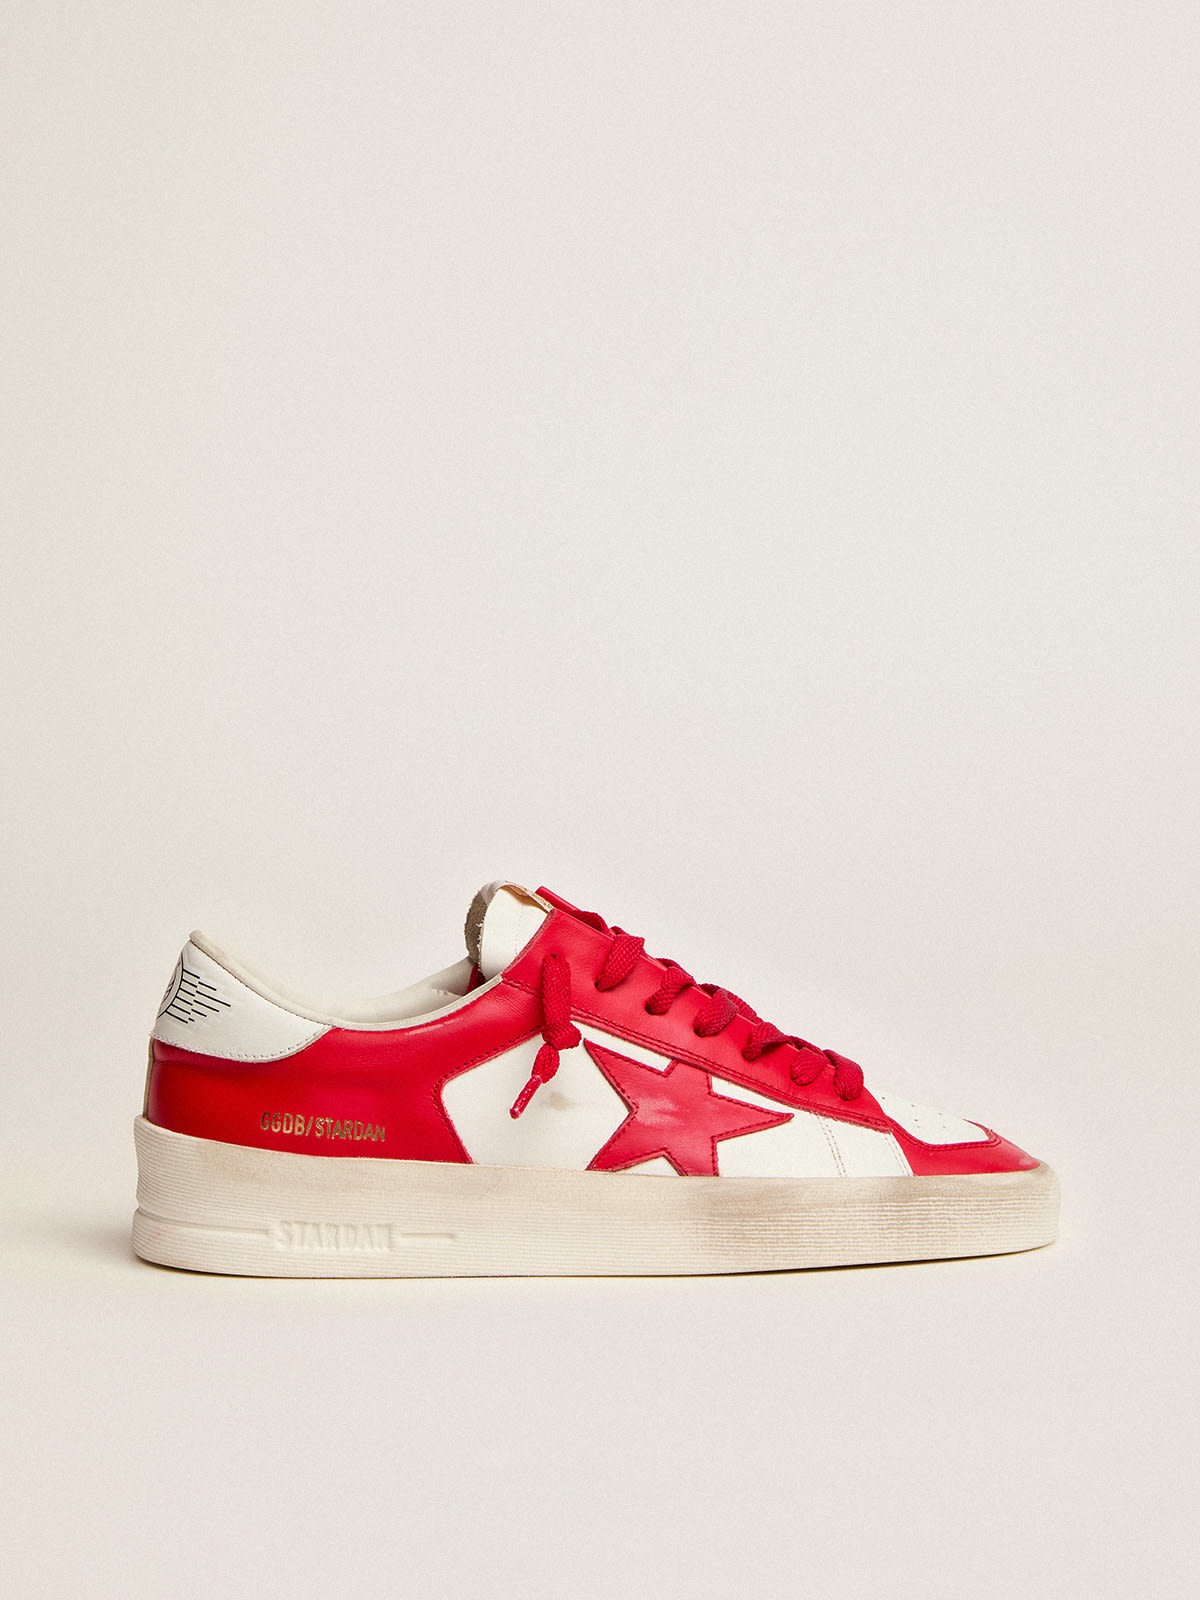 Golden Goose - Women’s Stardan sneakers in red and white leather in 